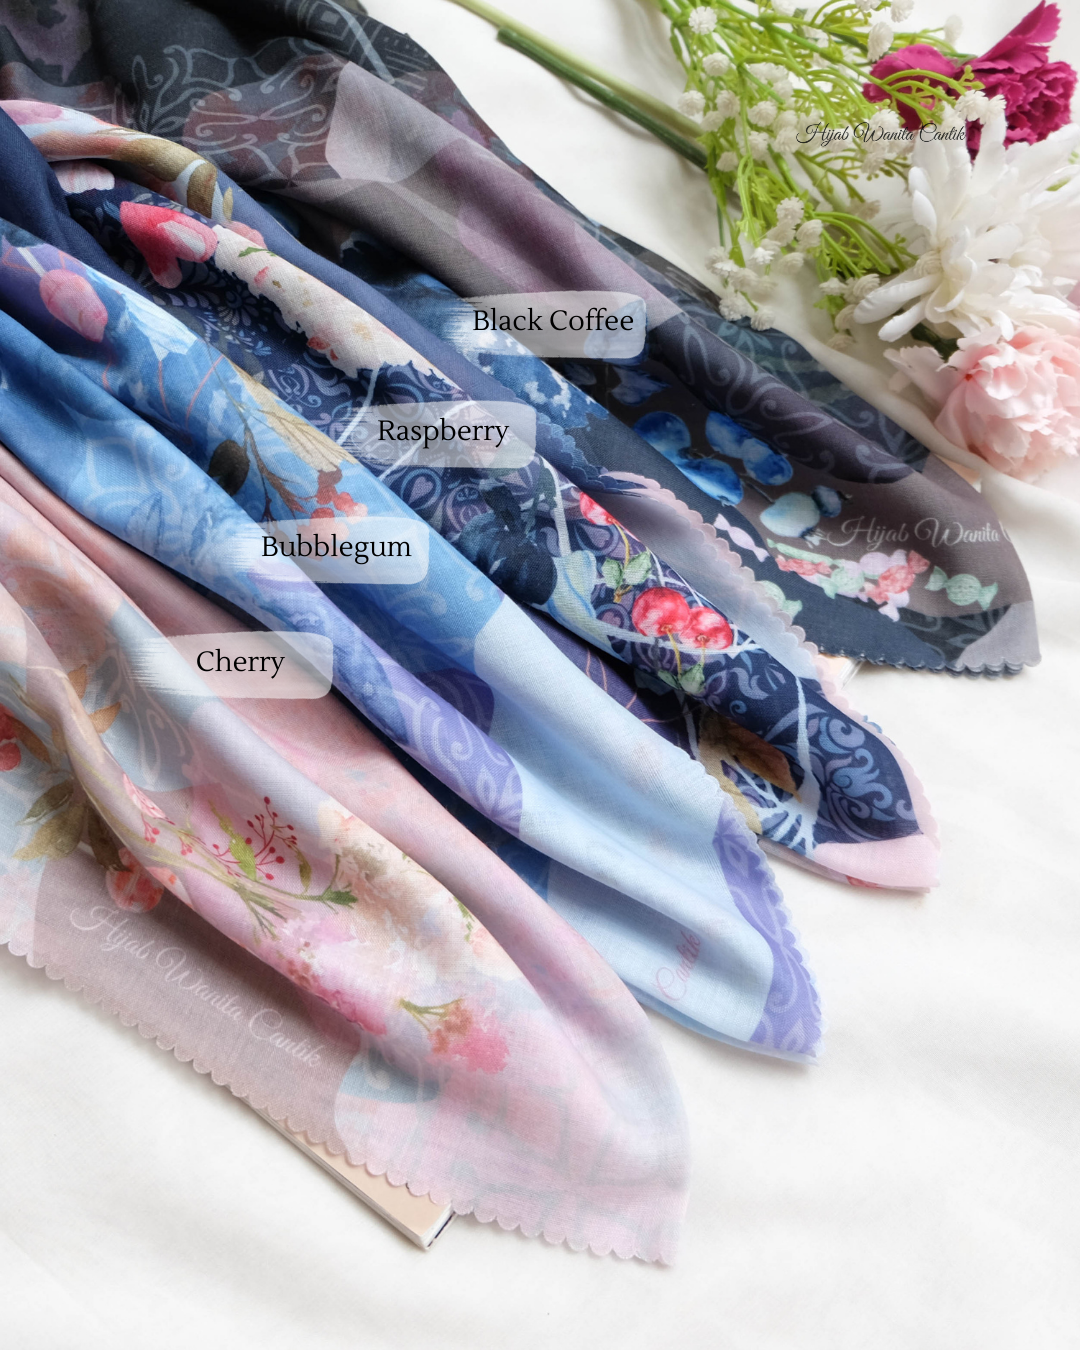 Candy Scarf Icy Voal - CY03.6 Cherry